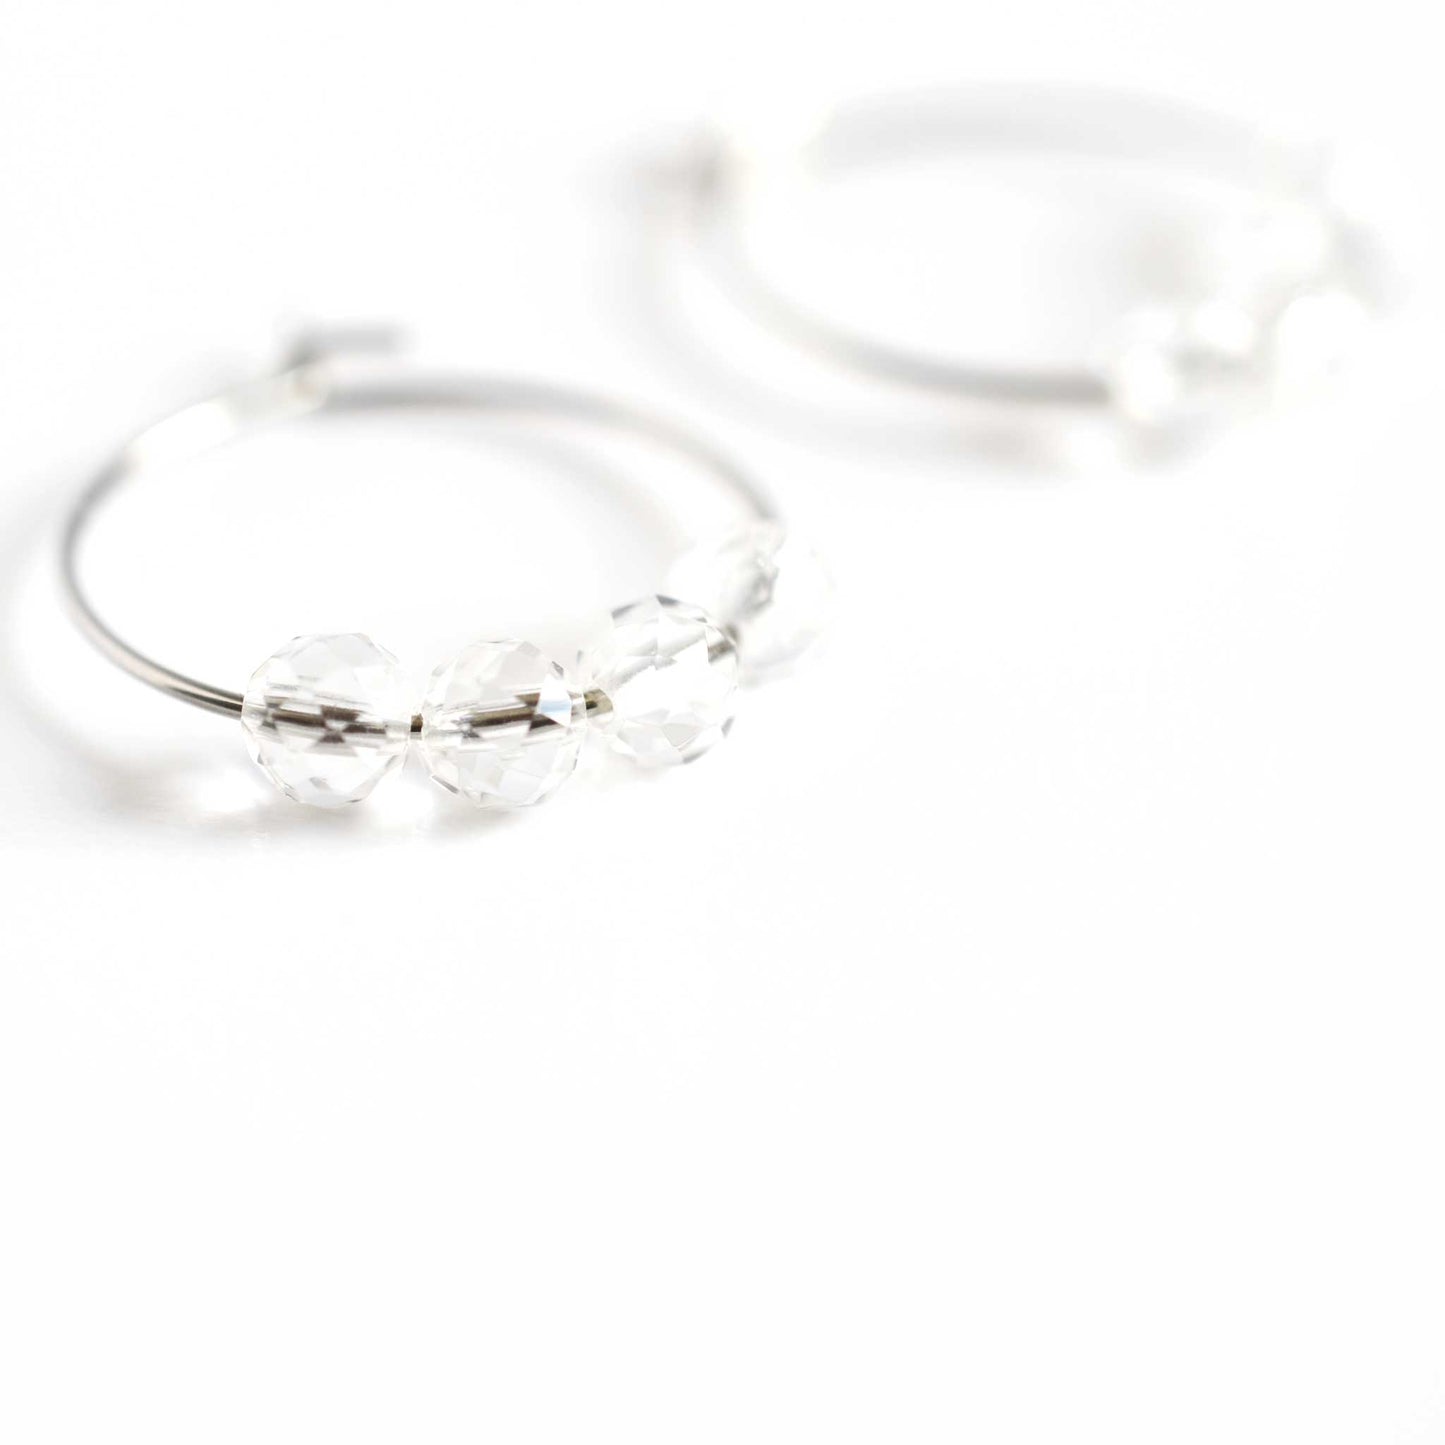 Close up of Rock Crystal hoop earrings with four small round faceted Clear Quartz gemstone beads